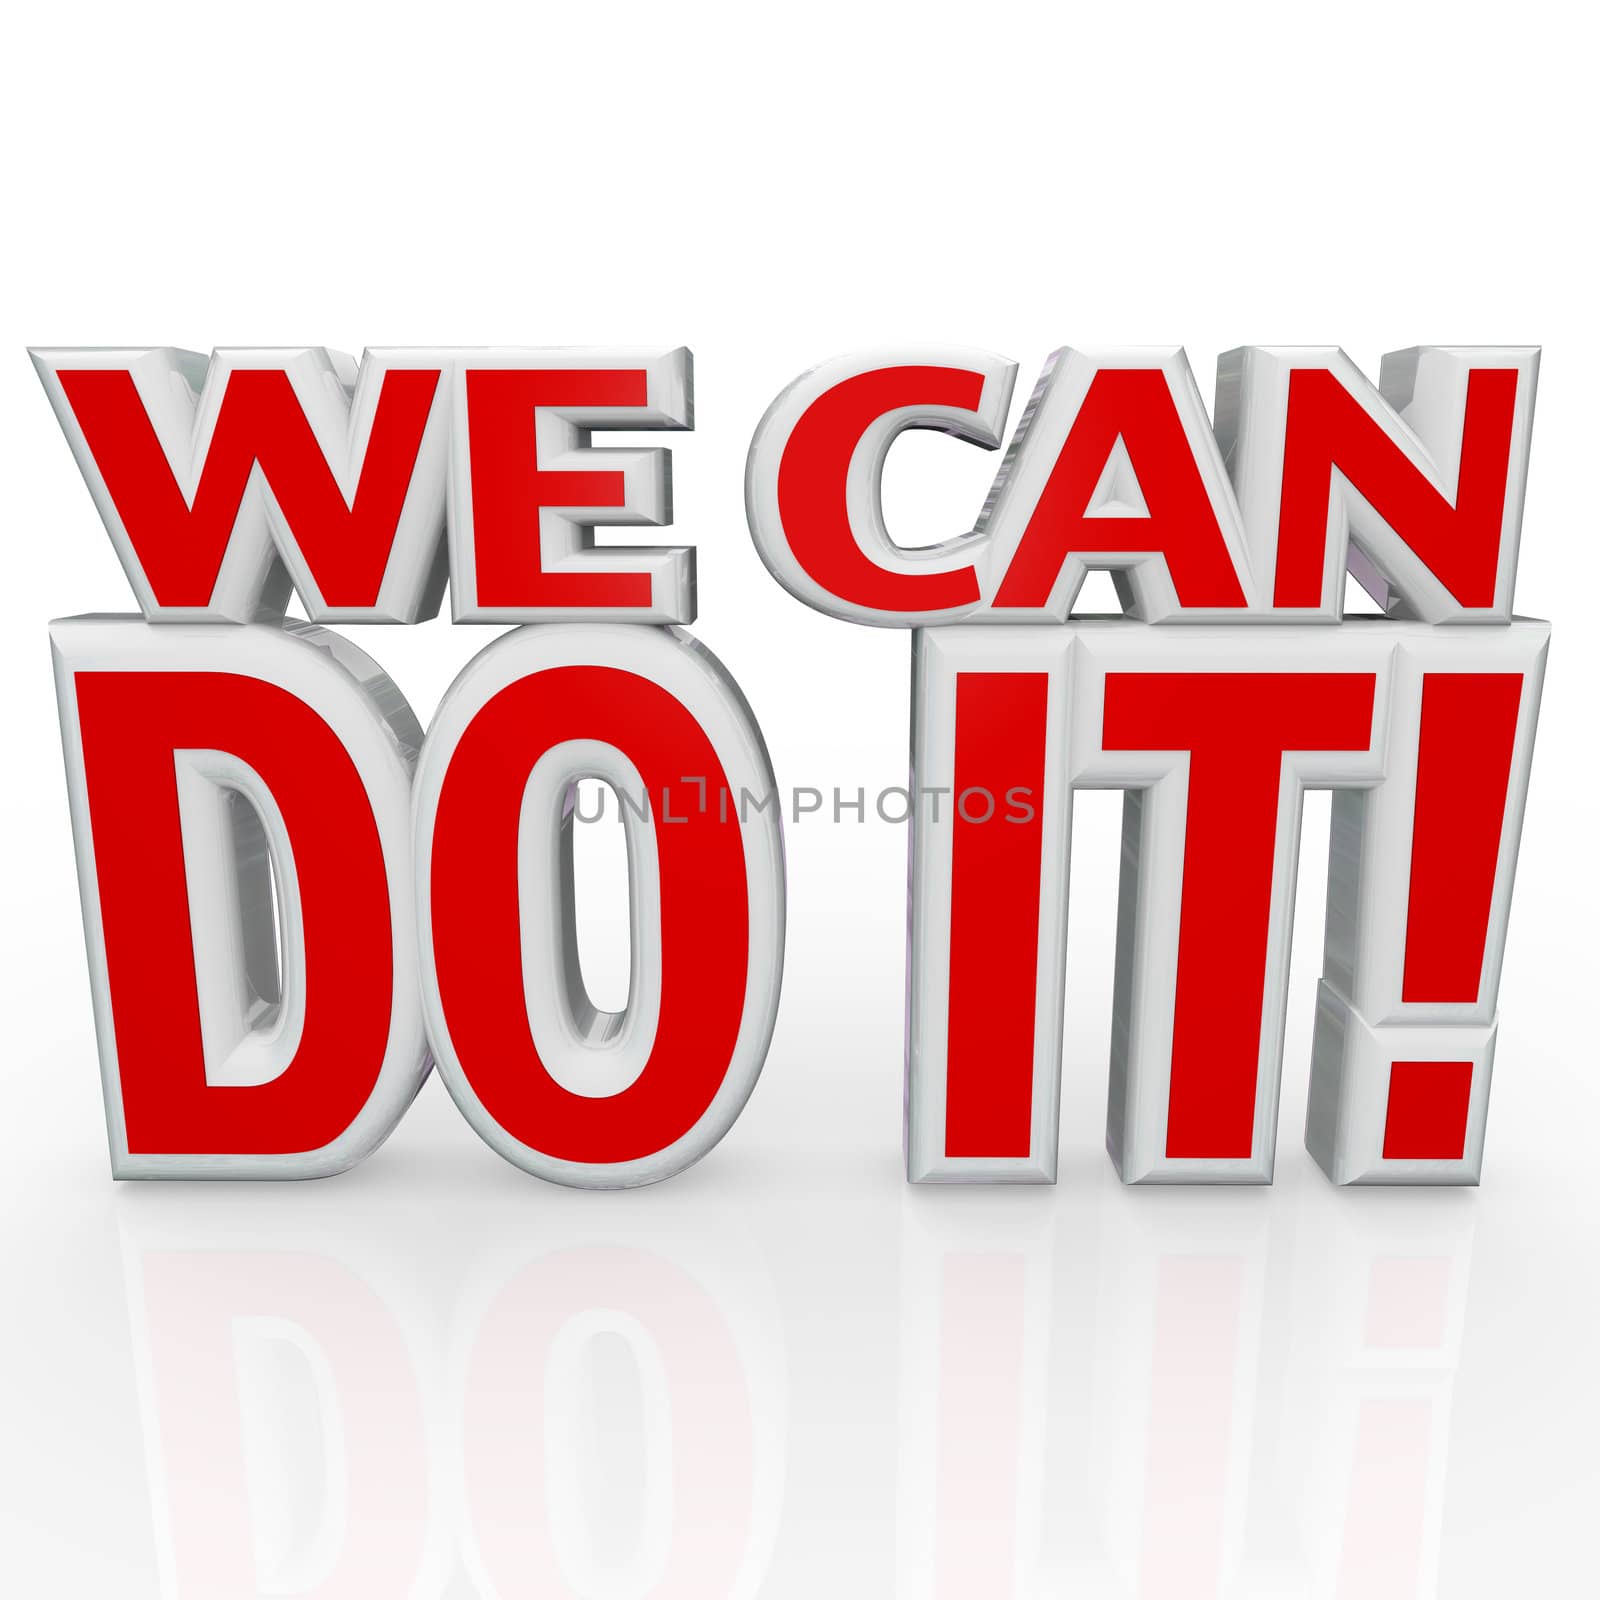 The words We Can Do It in red 3d letters to symbolize confidence and a positive attitude needed with determination in order to succeed in achieving a common goal together